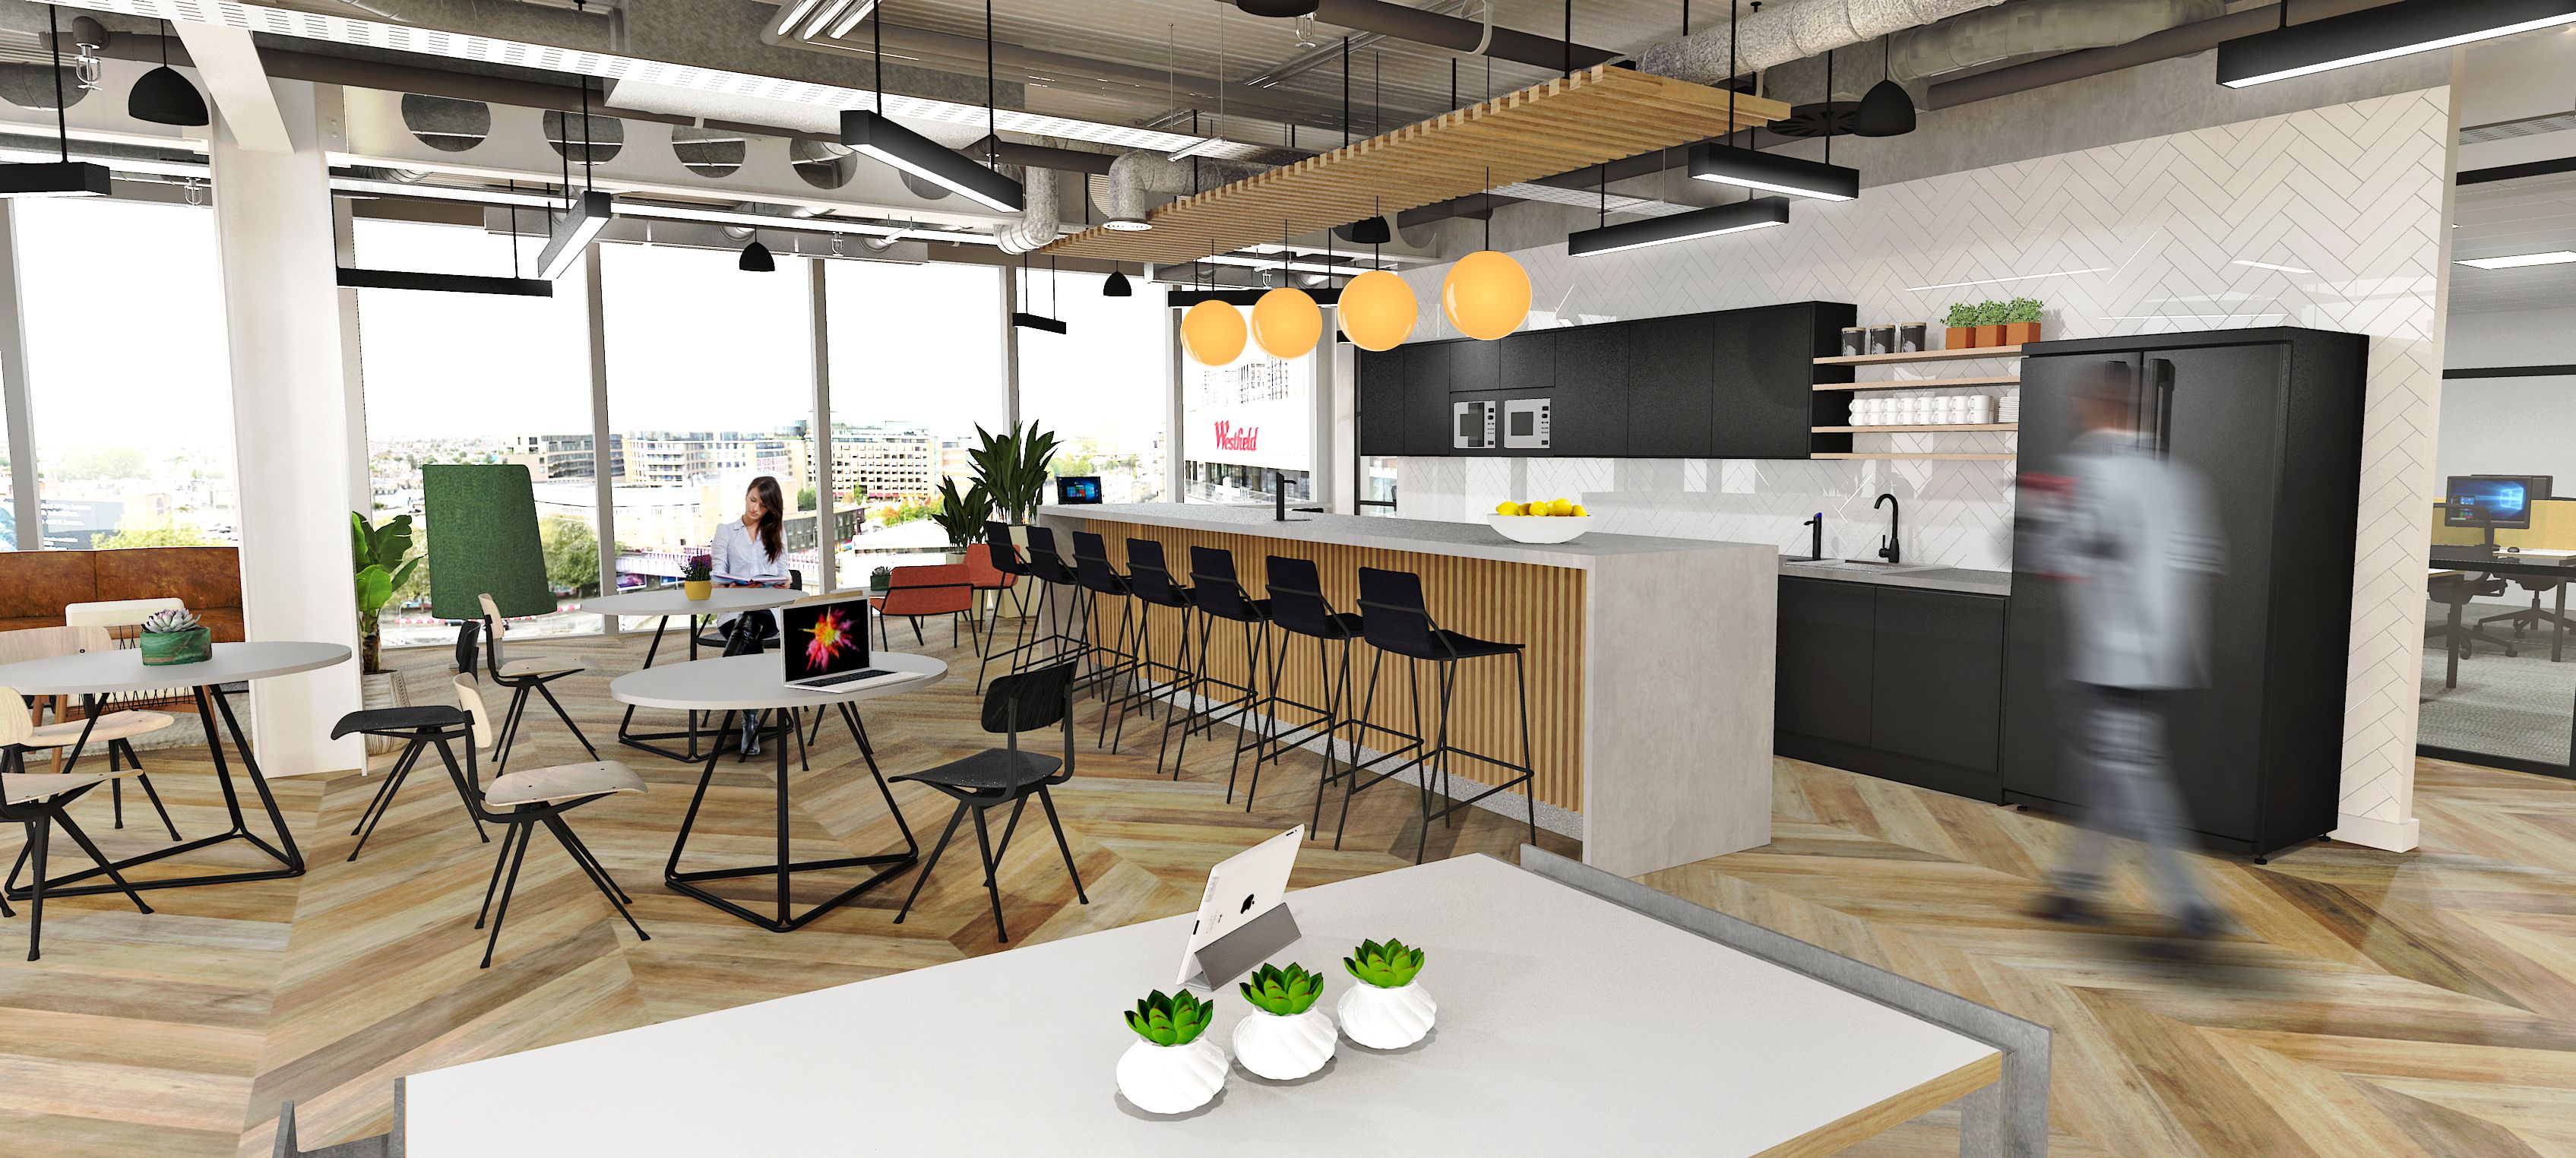 Venture X Co-Working Franchise Empire Comes to the UK